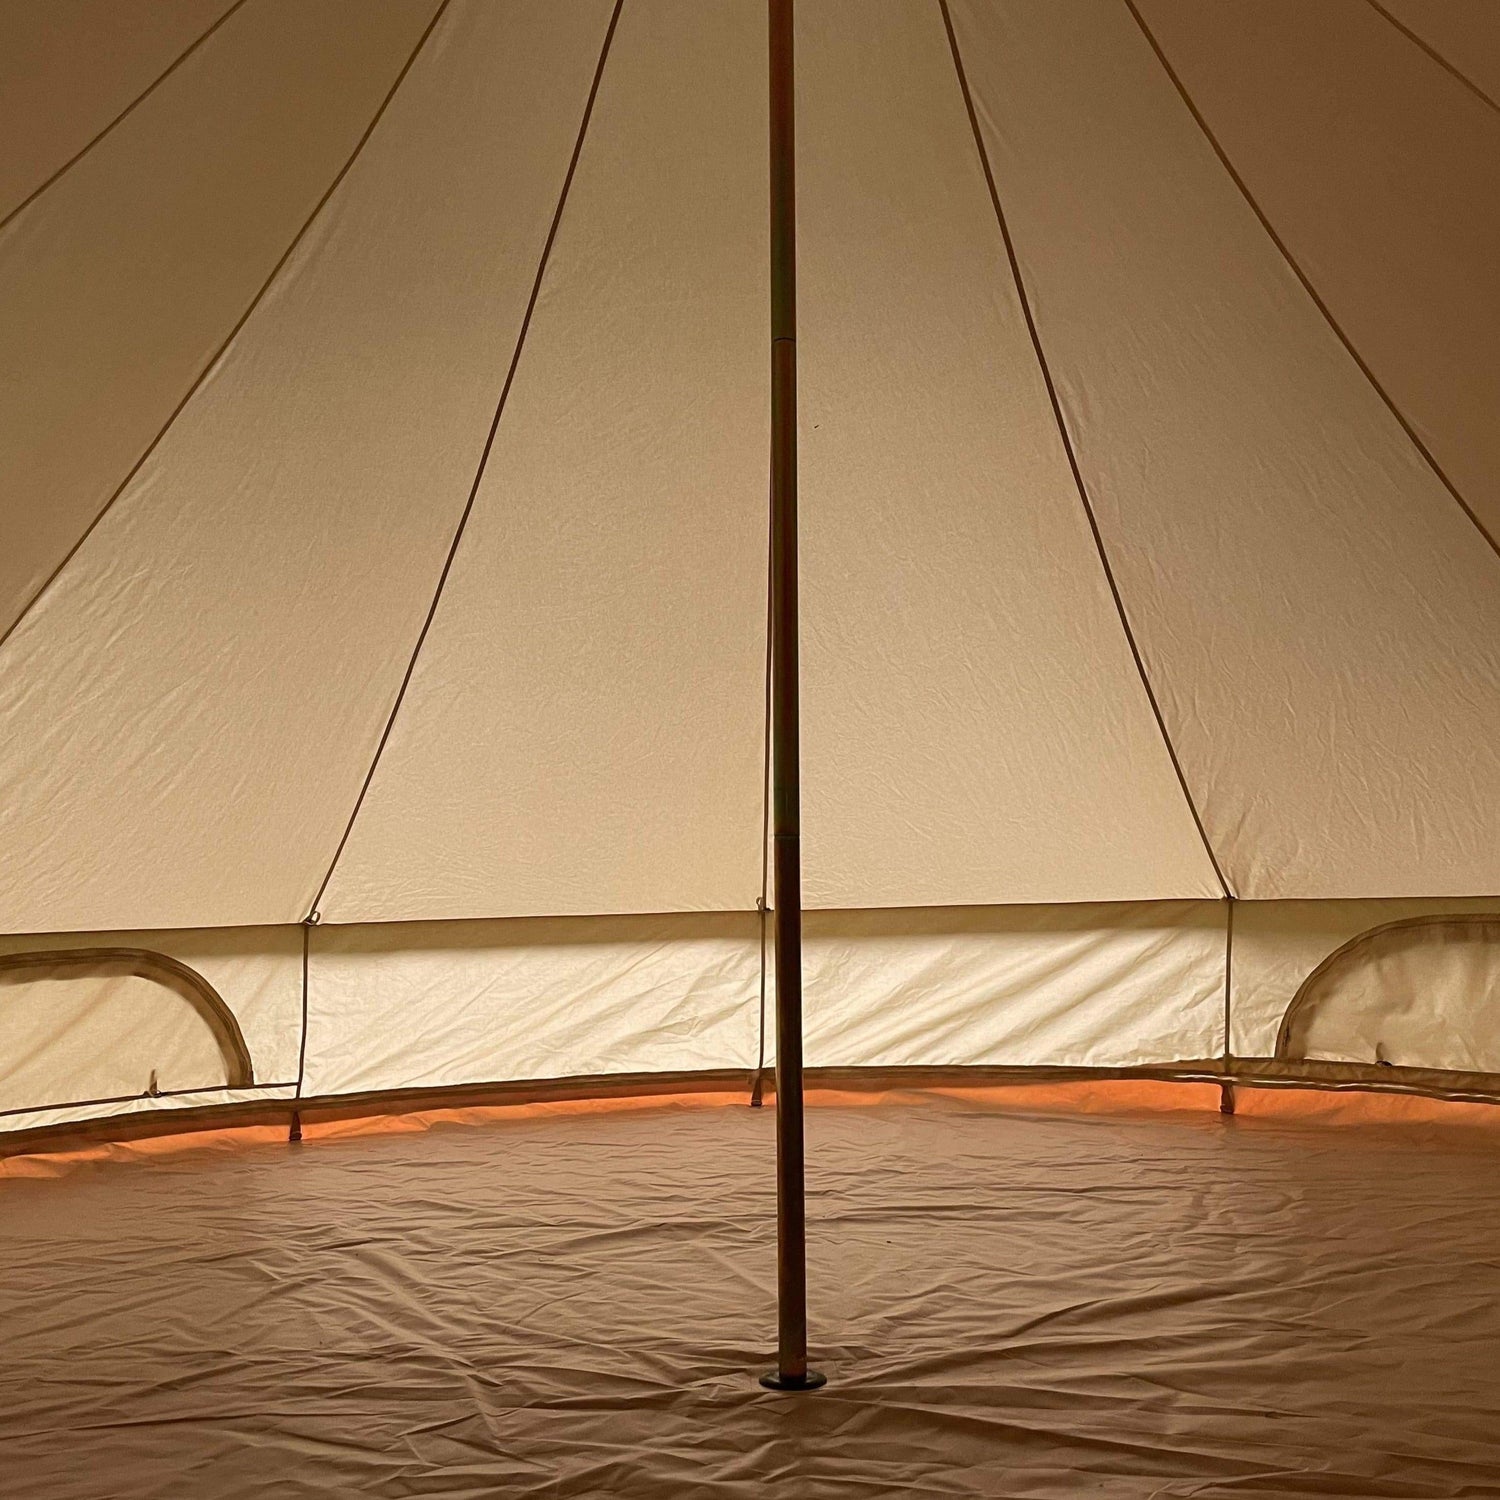 5m Bell Tent - Polycotton Canvas - Bell Tent Sussex